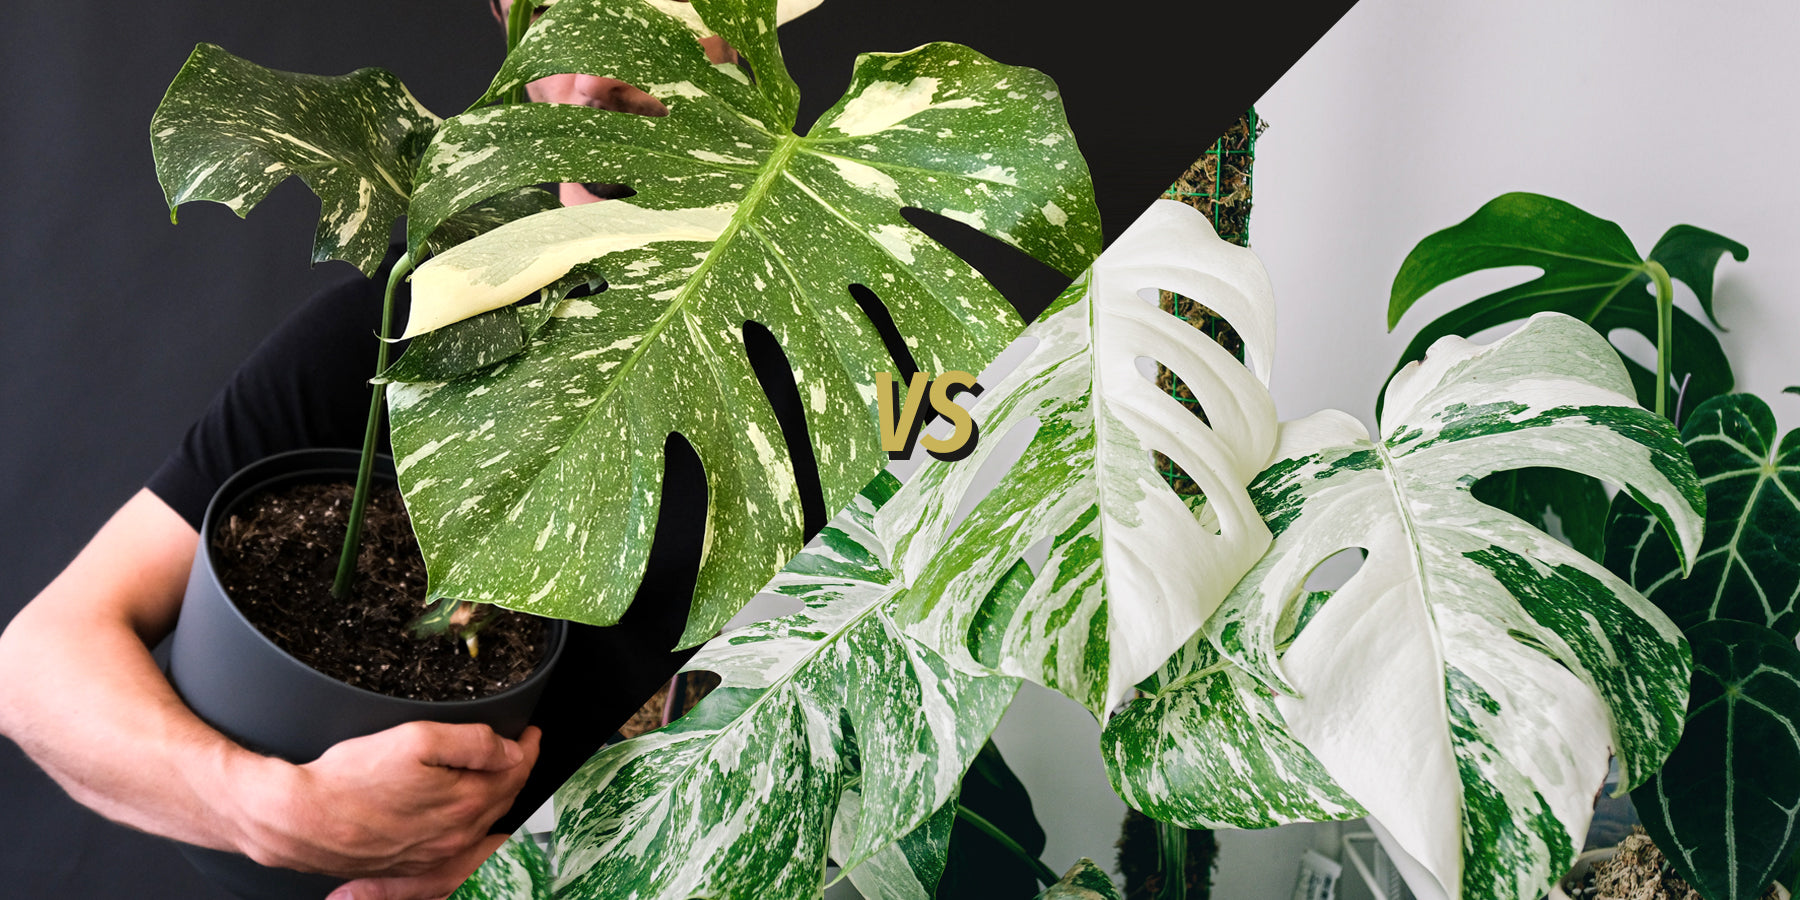 What's the difference between a Monstera Thai Constellation and Monstera Albo Variegata?